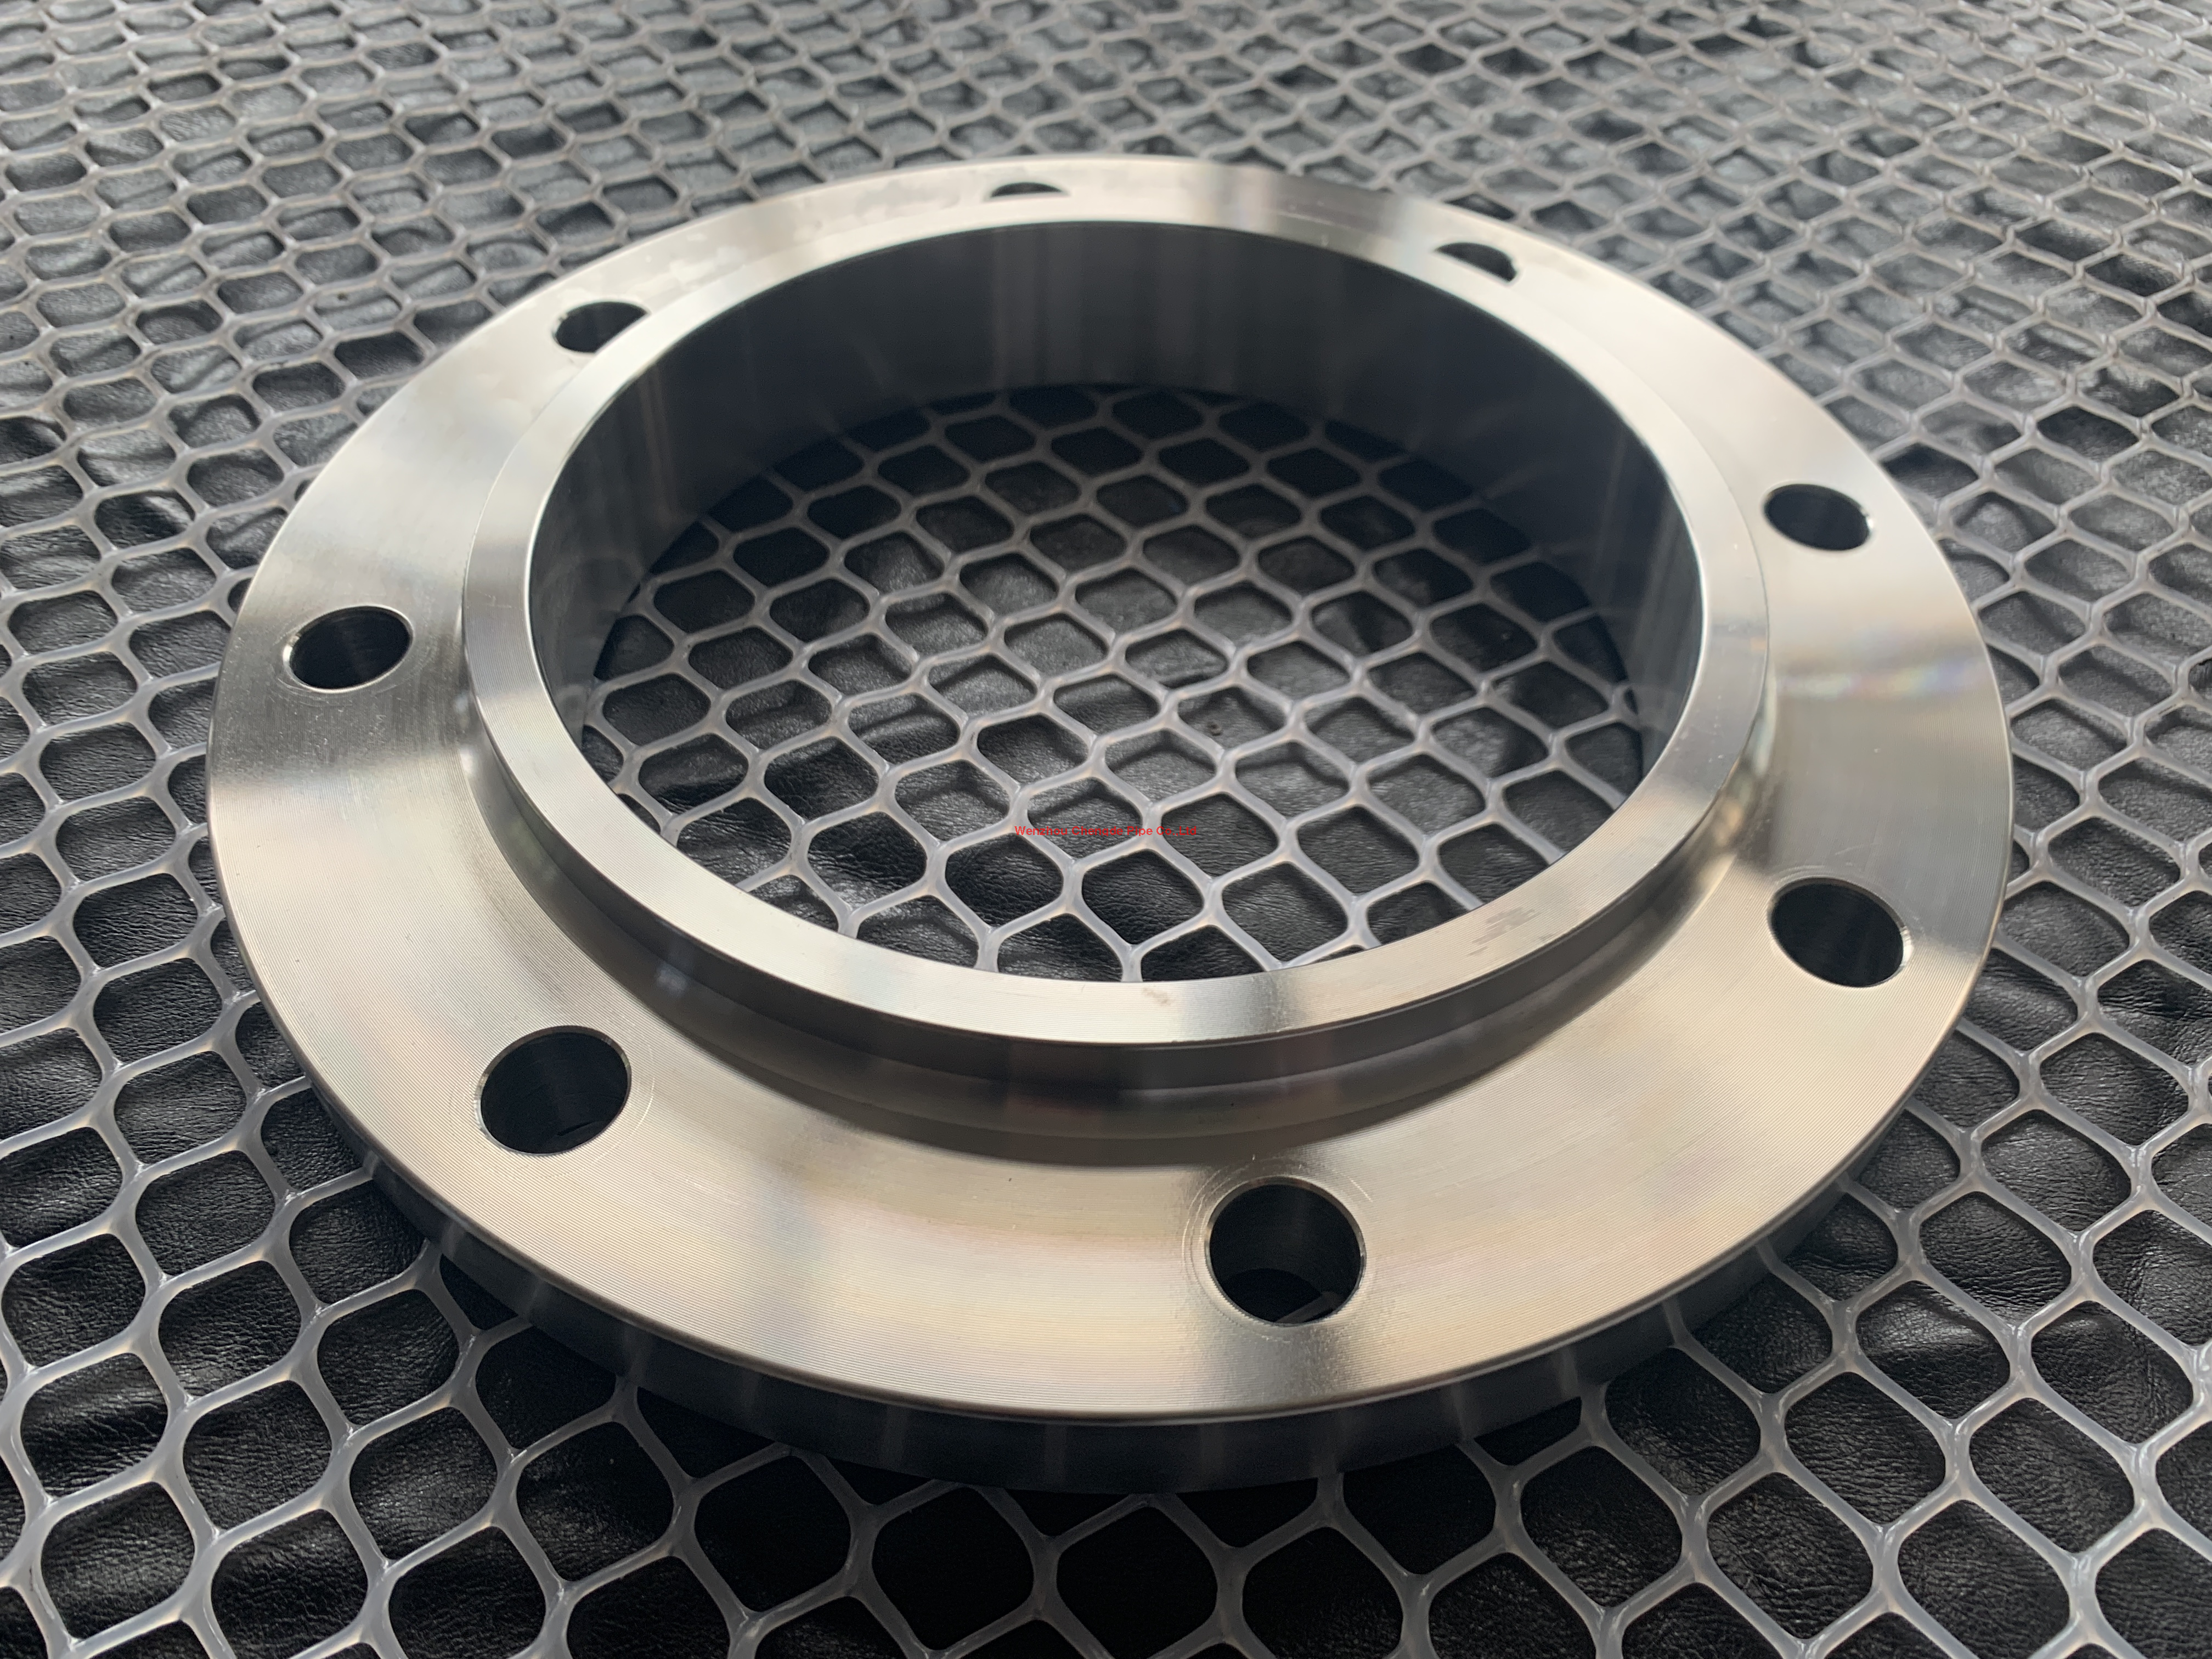 ANSI B16.5 plate Flange for DUPLEX STAINLESS STEEL CDPL009